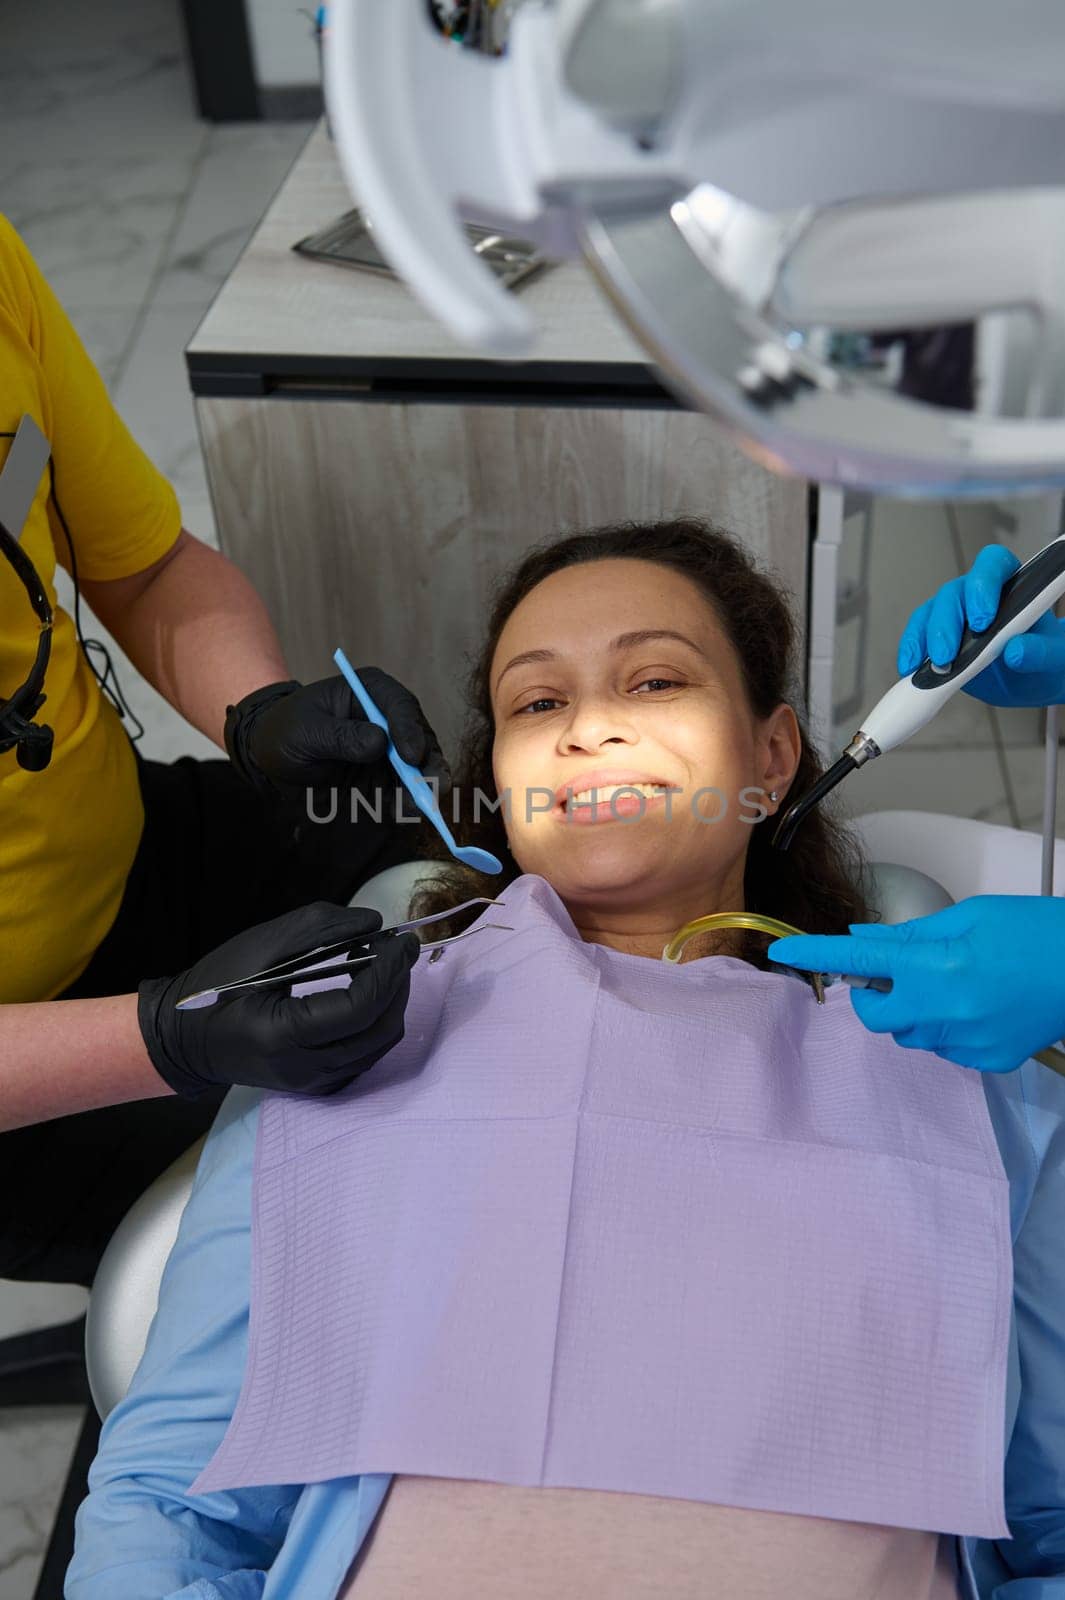 Beautiful pregnant woman in dental chair getting oral cavity examination and treatment in dentistry clinic. Professional dentist and assistant holding instruments near a female patient face. Top view